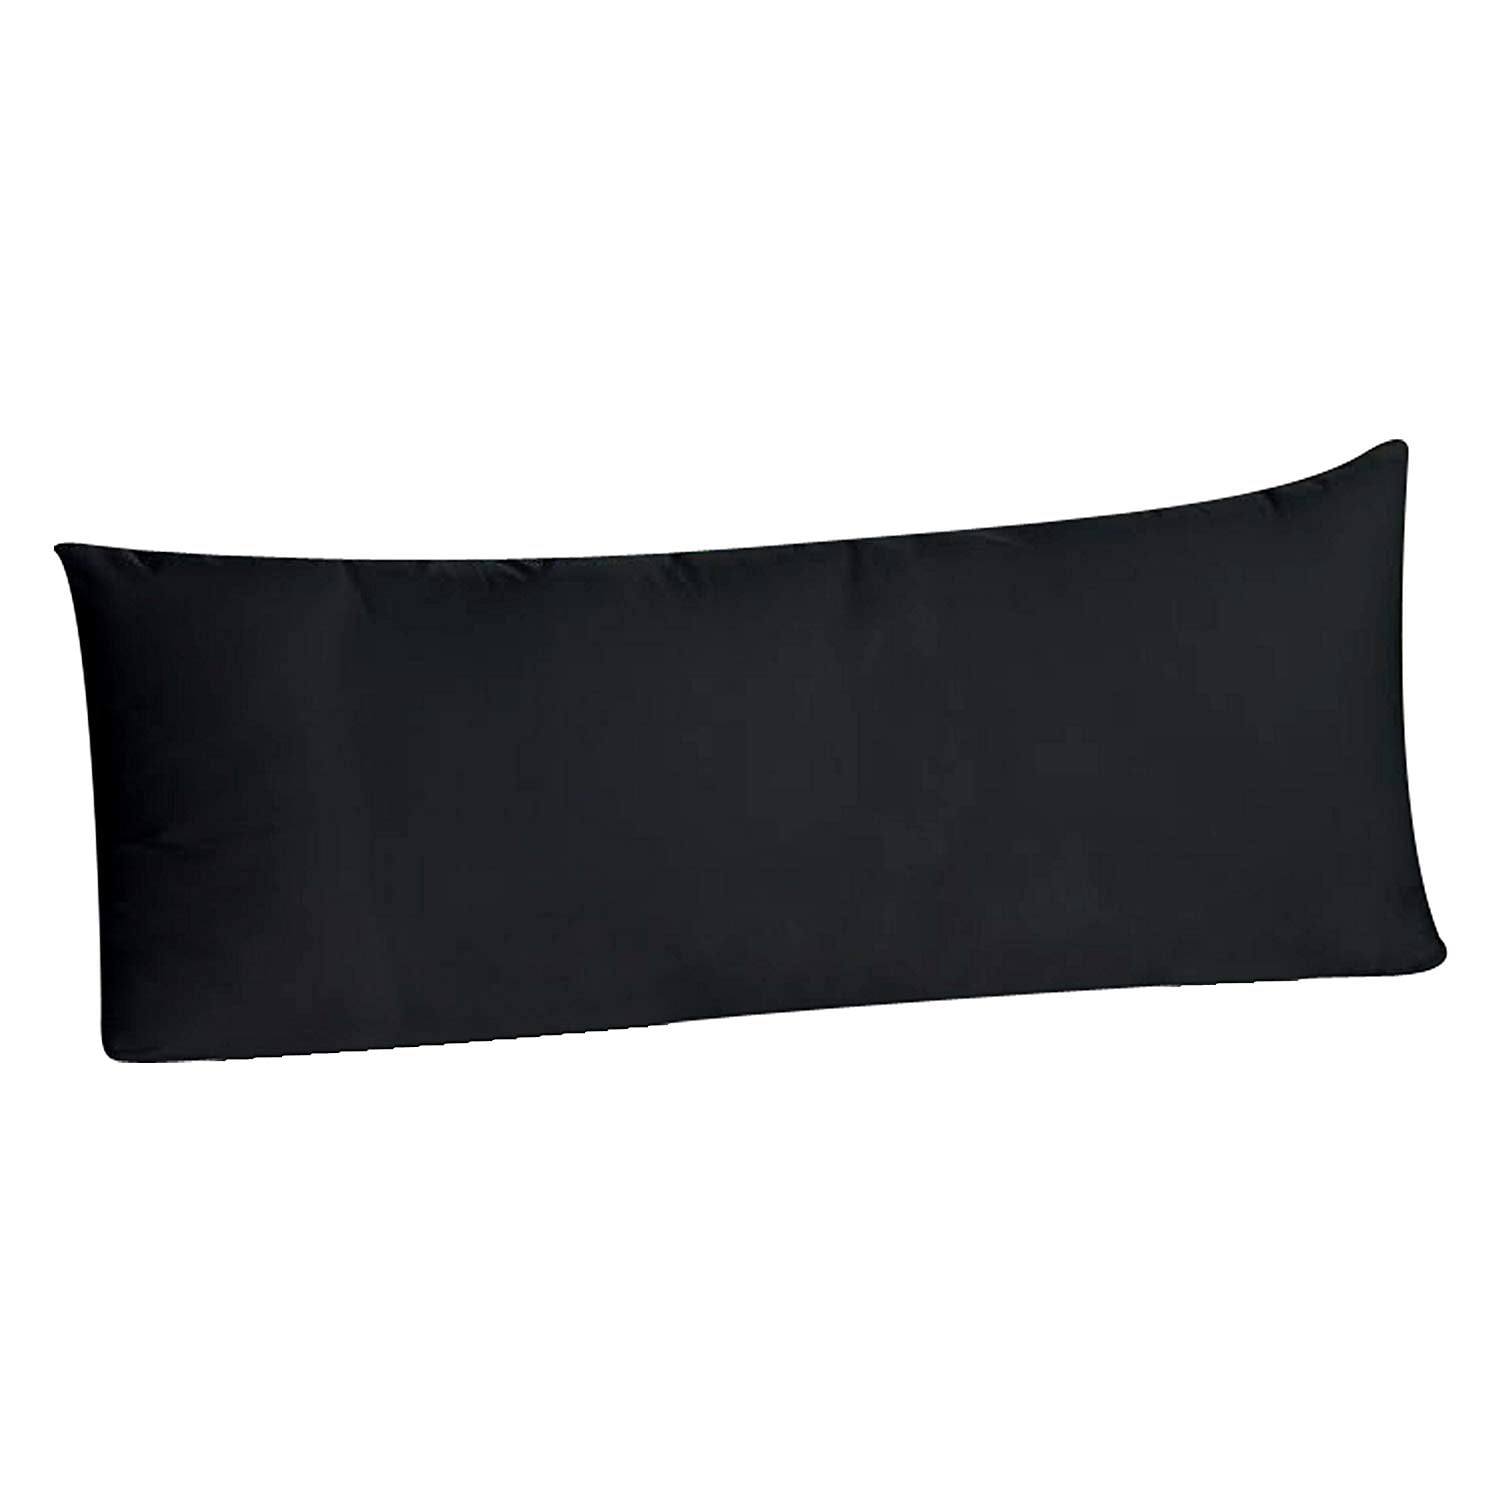 Body Pillowcase Pillow Cover Brushed Microfiber, Body Pillow Cover (20x54 Body Pillowcase, Black